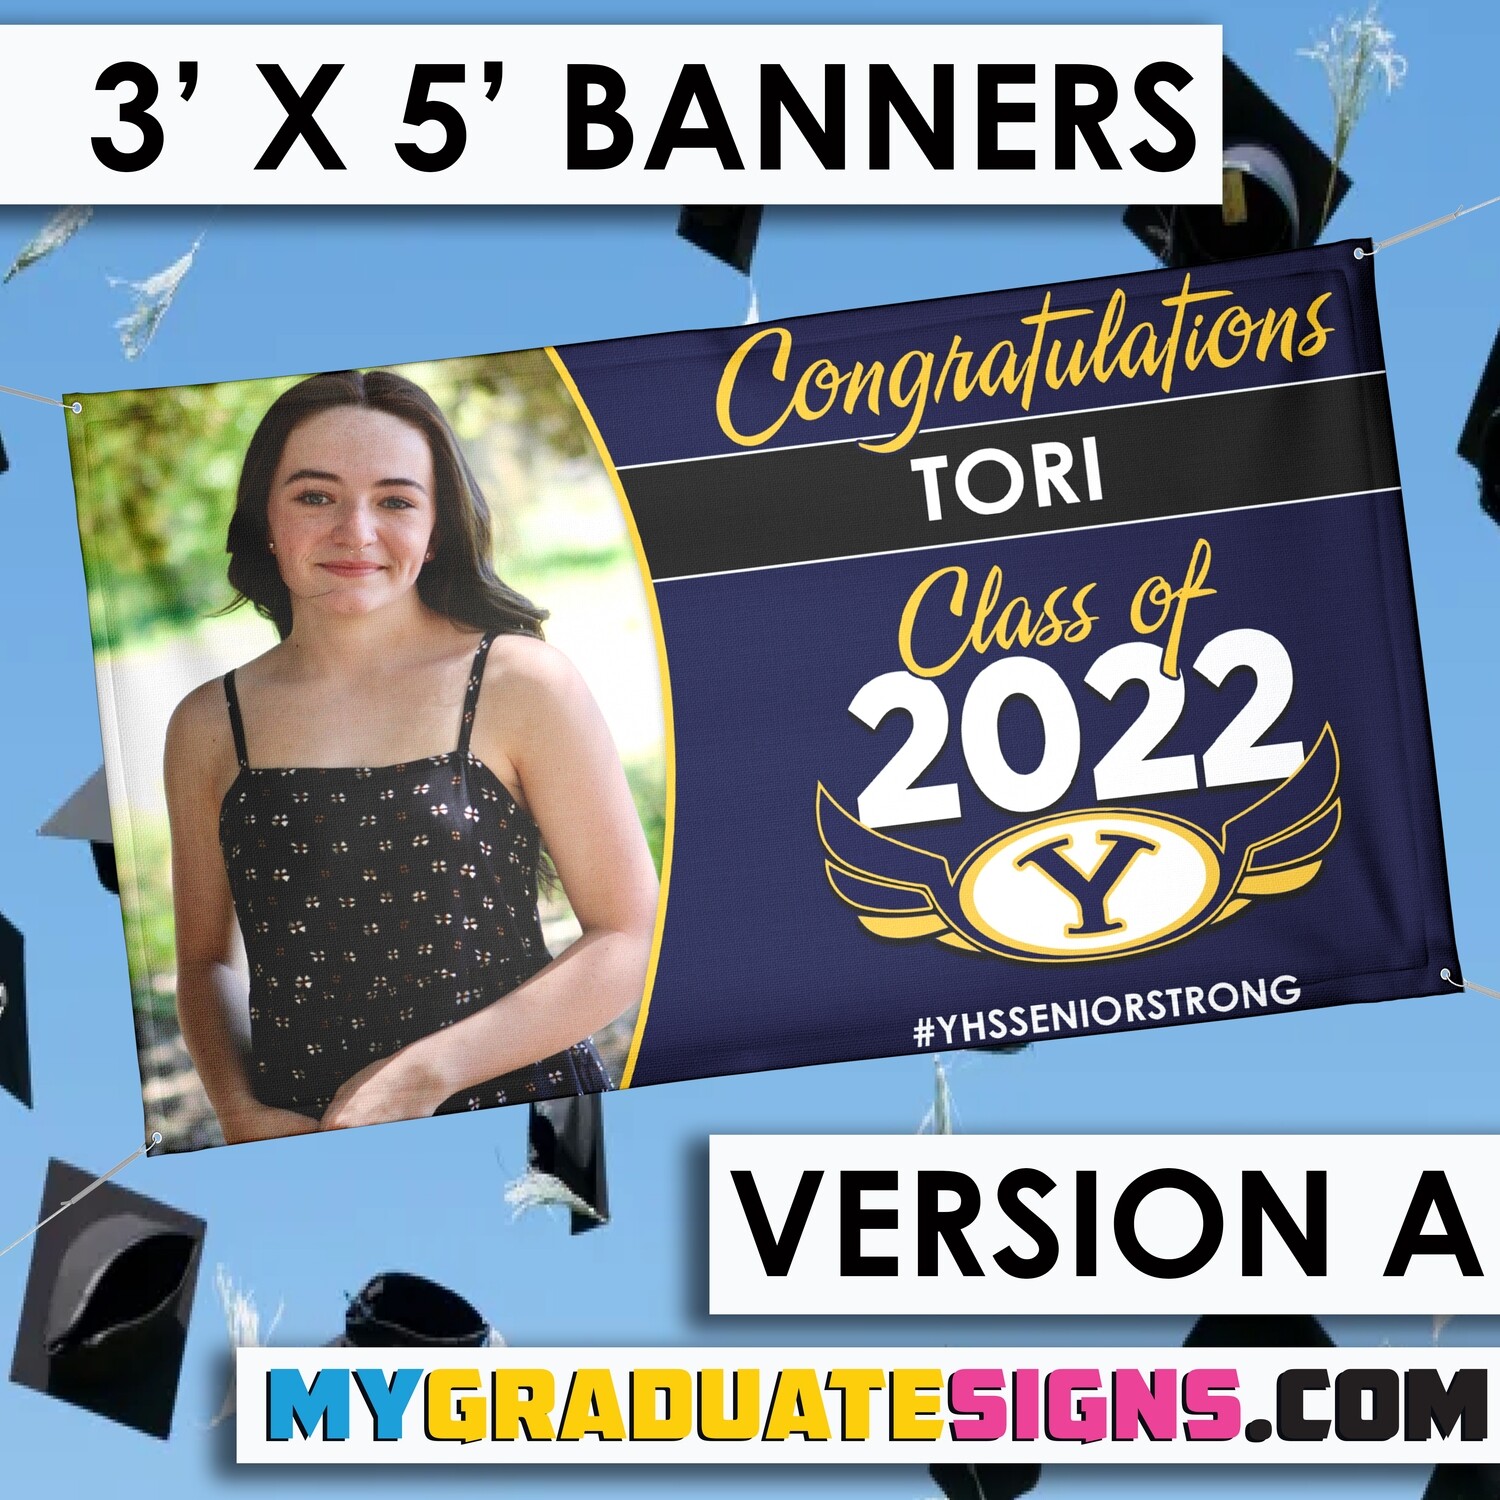 Cre8 & Print - Grad Banner - Class of 2022 VALLEY VIEW HS